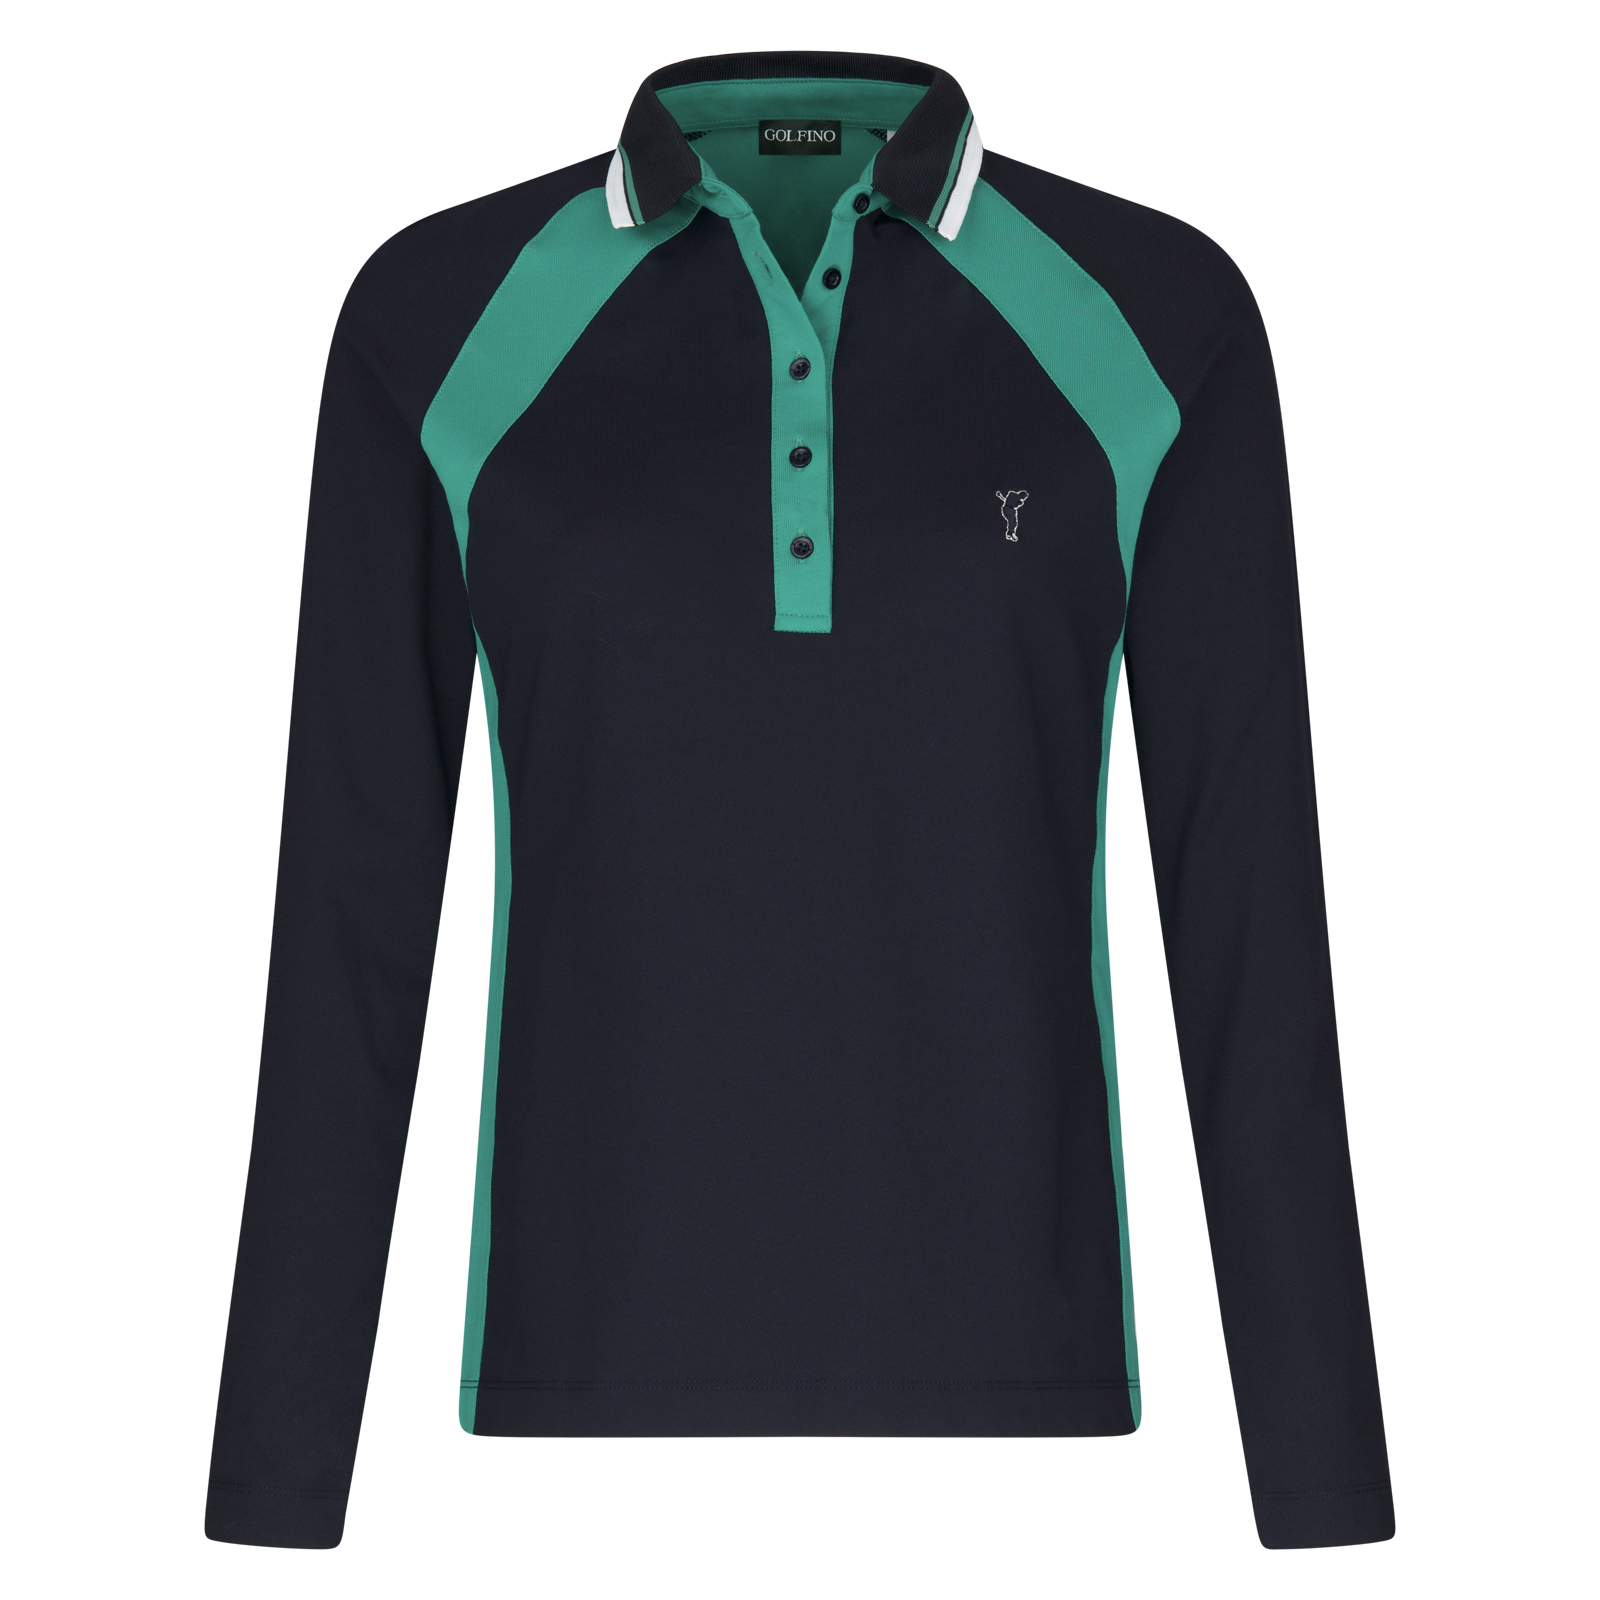 Ladies' long-sleeved performance polo shirt with sun protection function